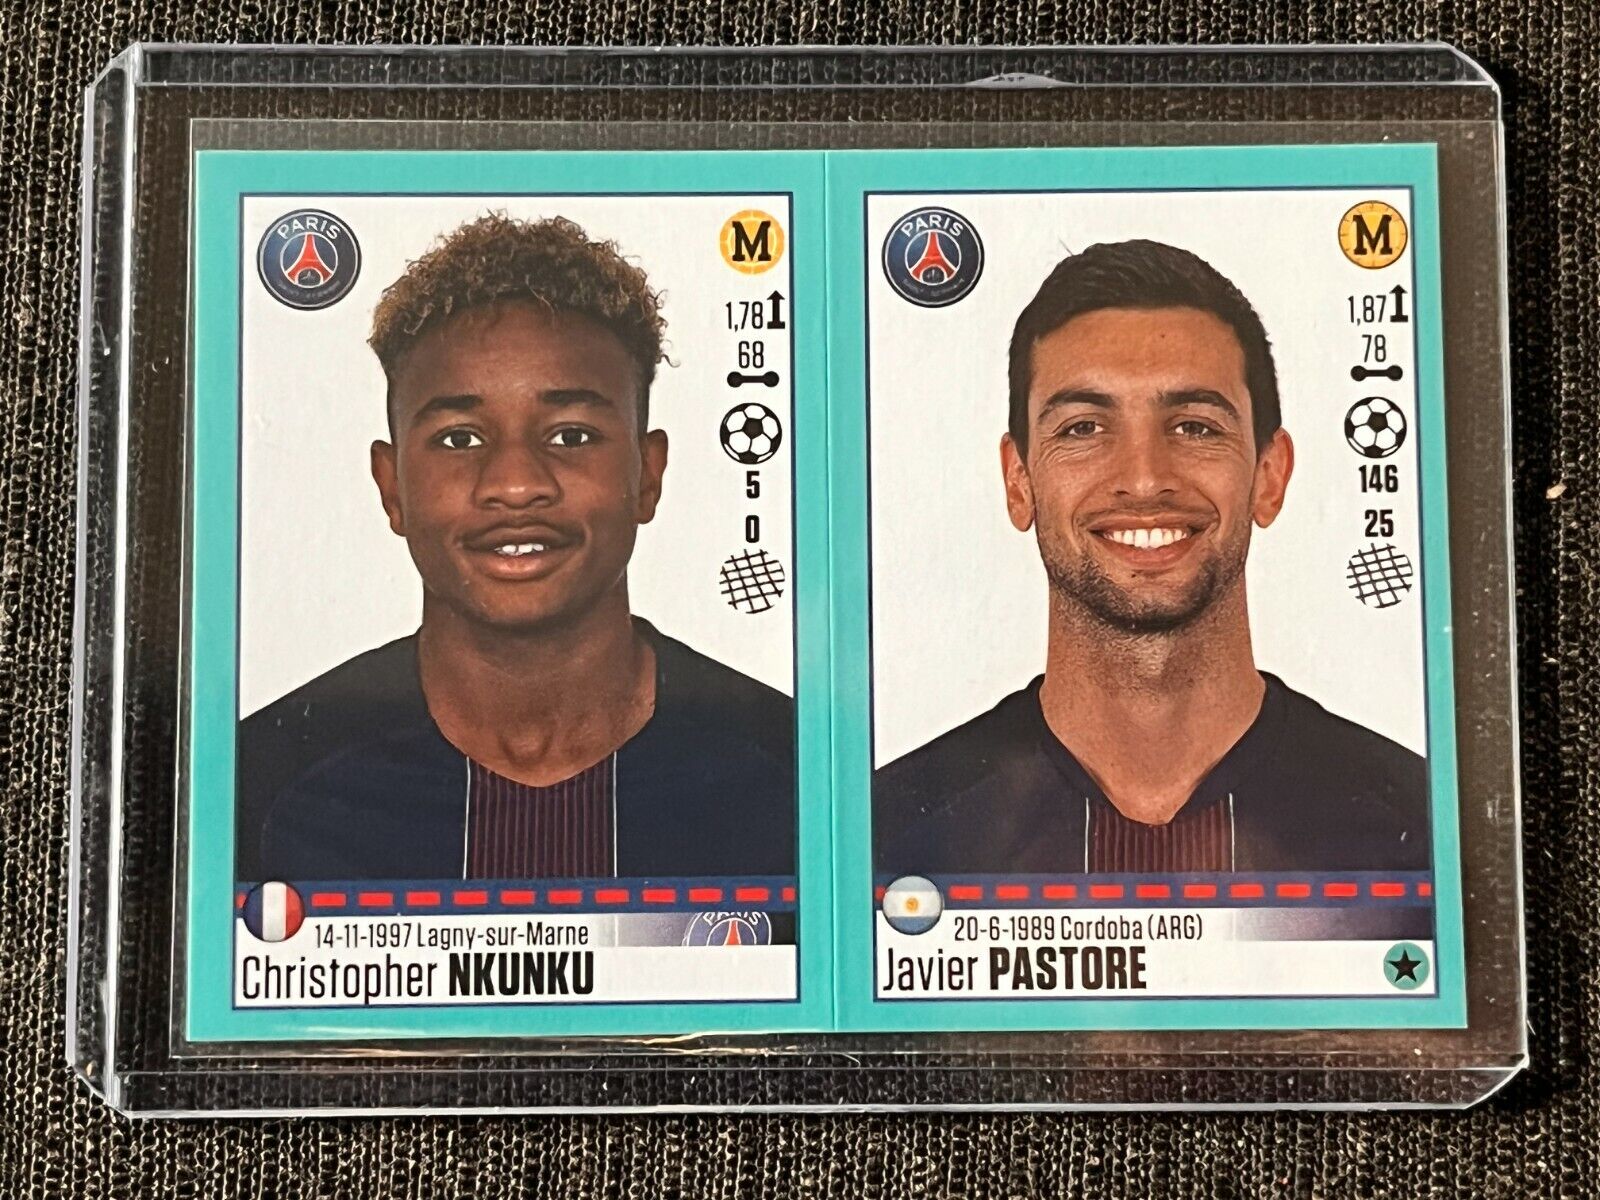 Sticker panini foot 2016/17 french issue christopher nkunku # 708 mint rookie